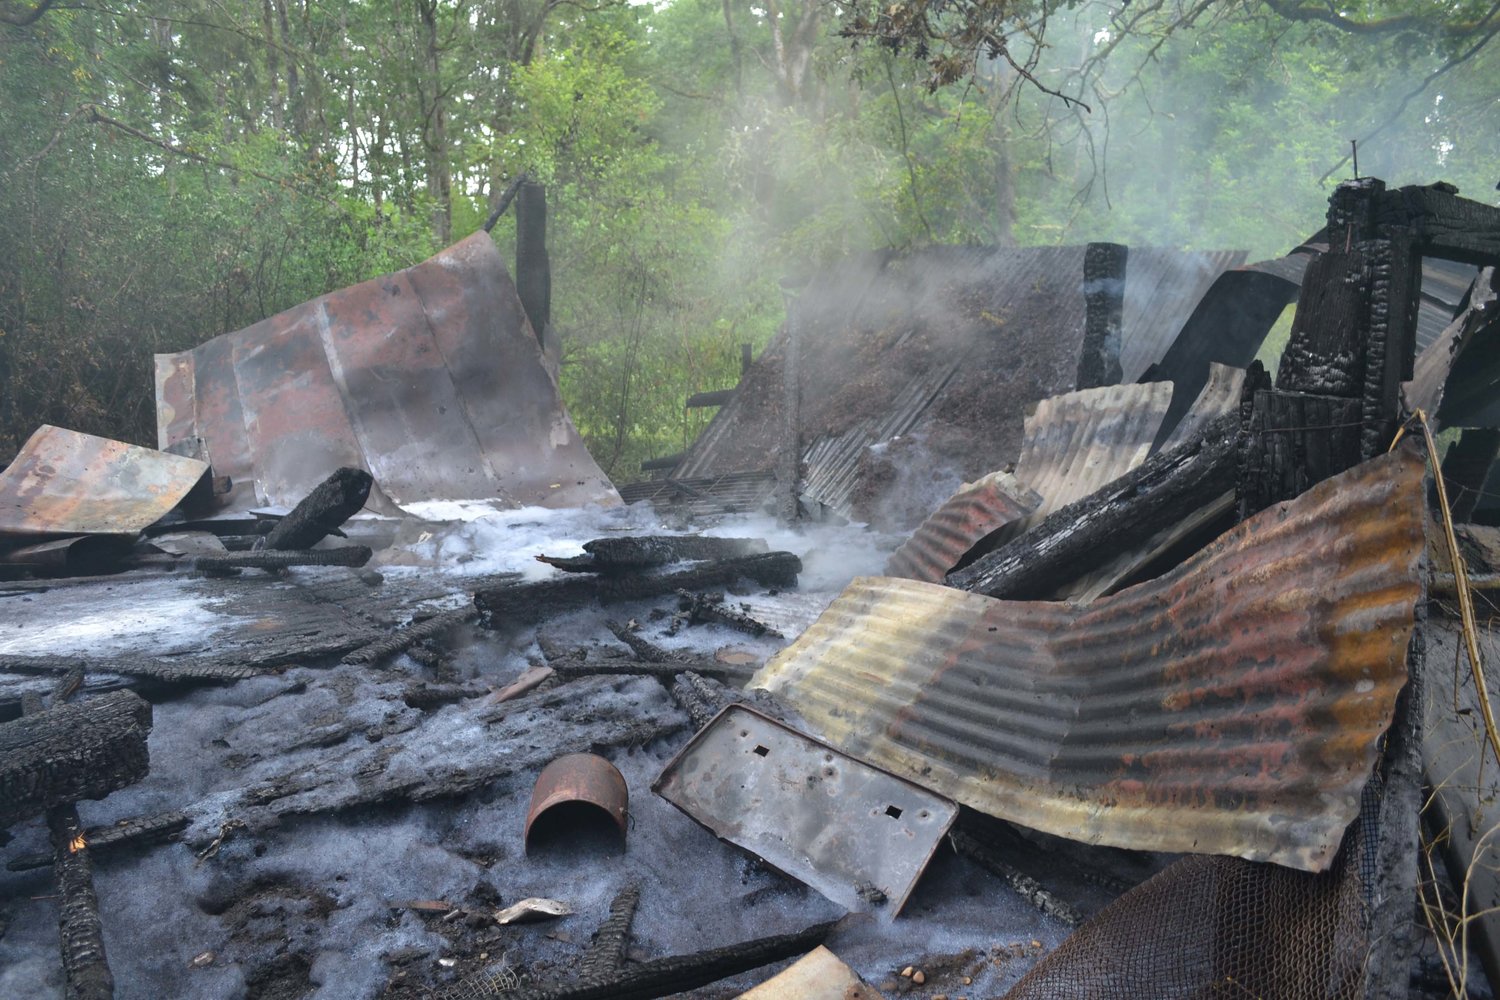 Firefighters put out a fire that destroyed a barn-like structure in the woods near Four Corners in Yelm Thursday morning.